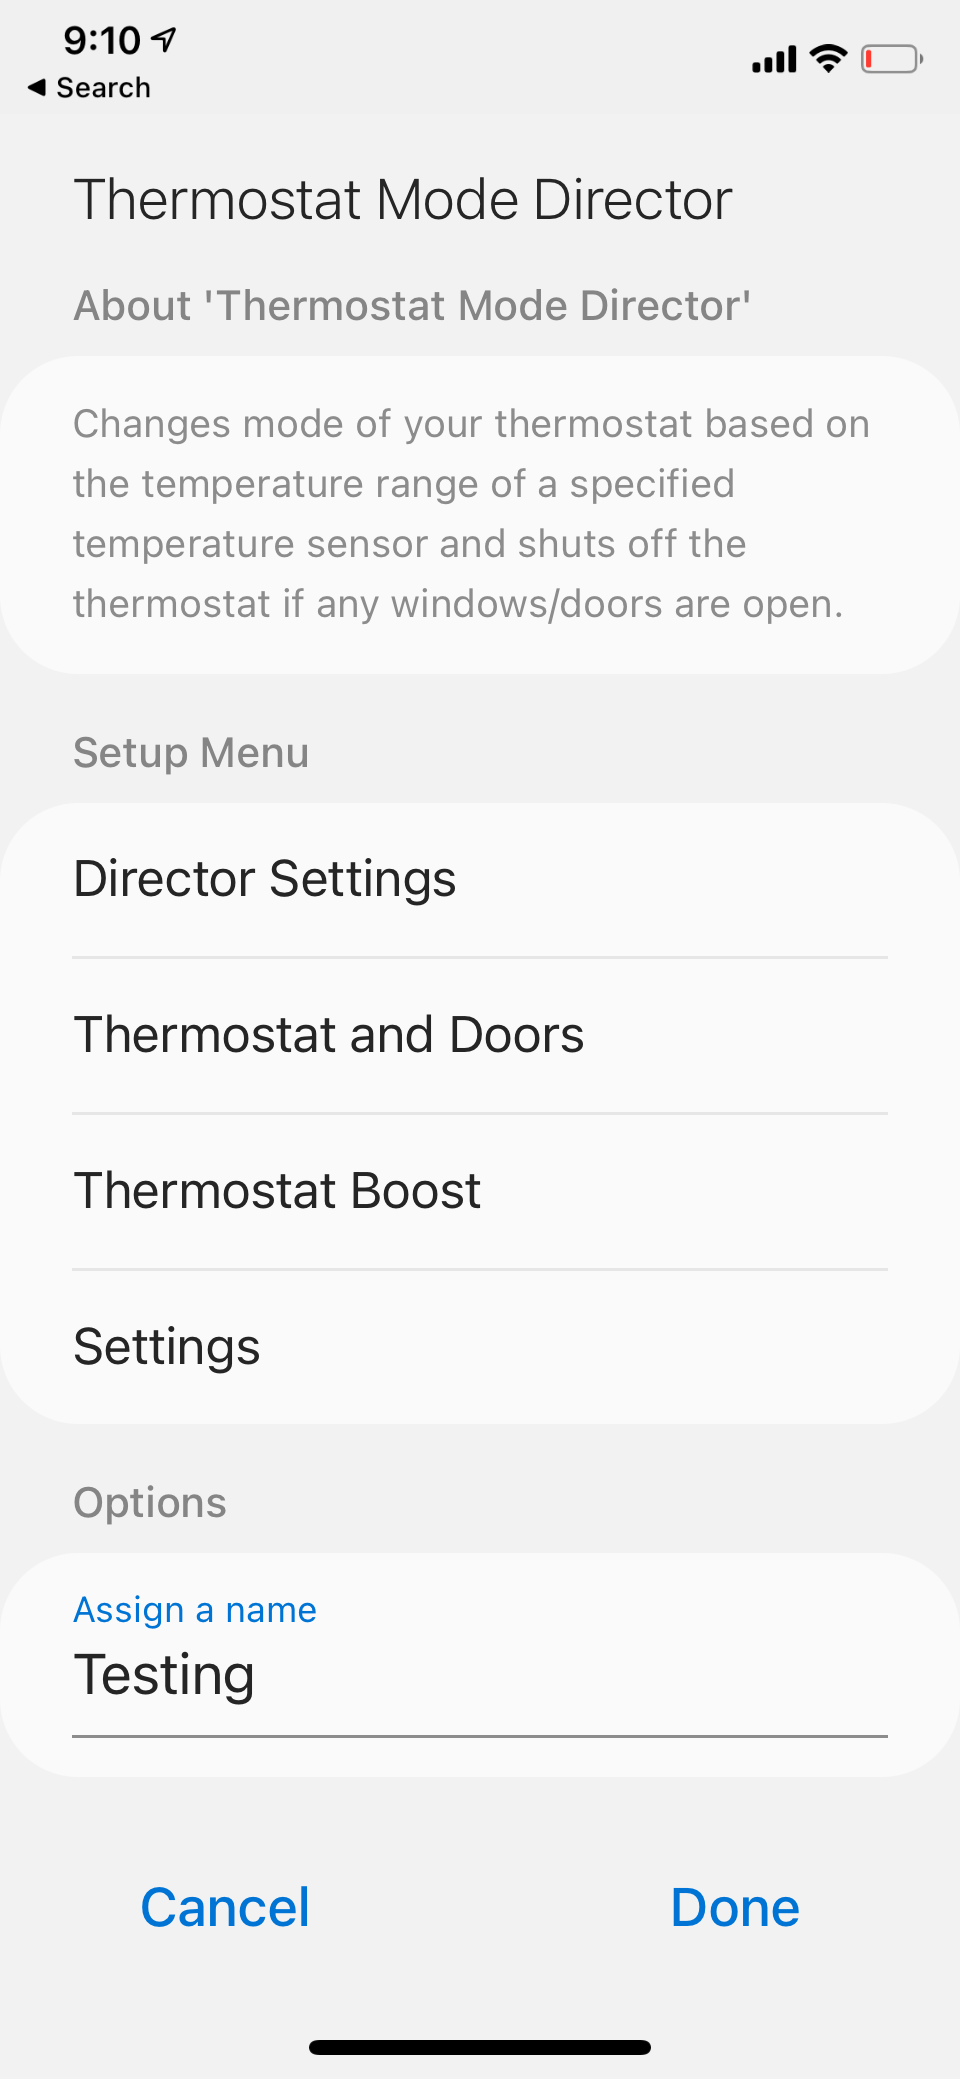 Thermostat Mode Director Main Screen